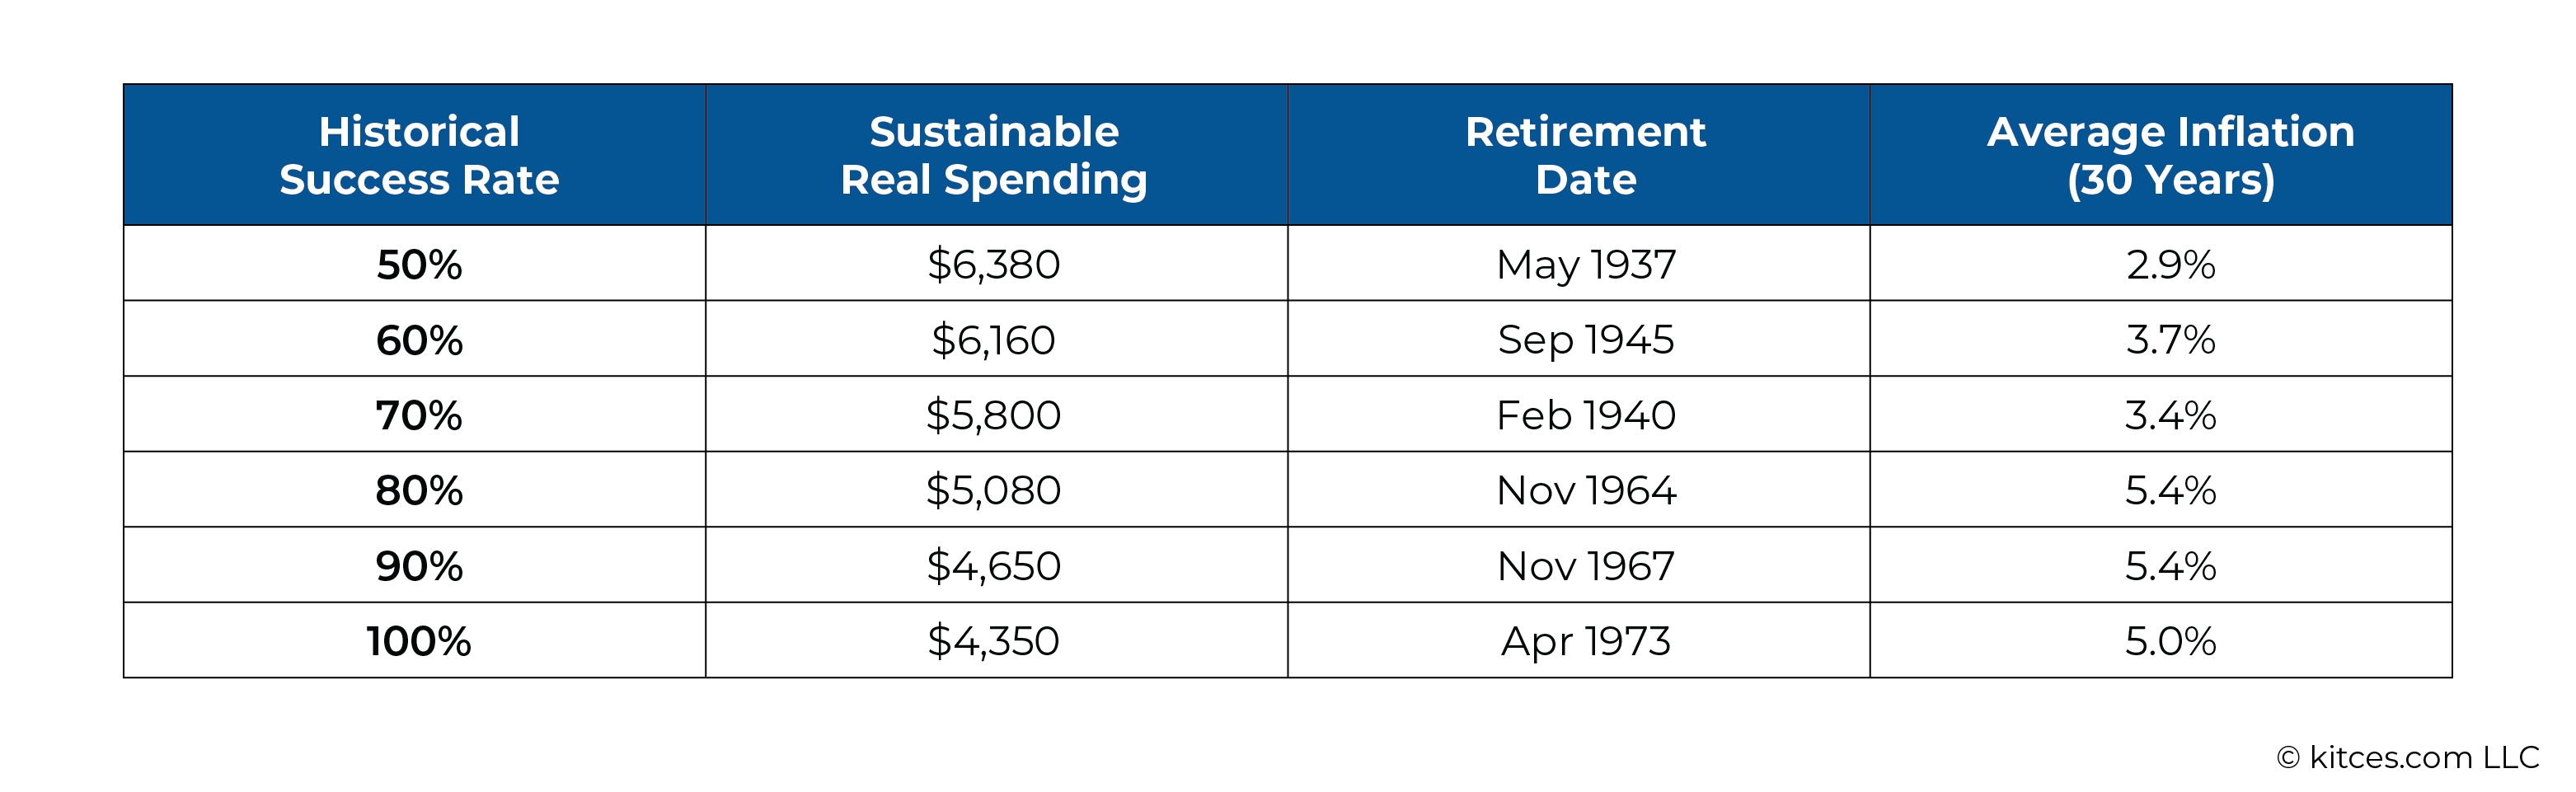 Historical Success Rate Based On Retirement Date Average Inflation Over Years